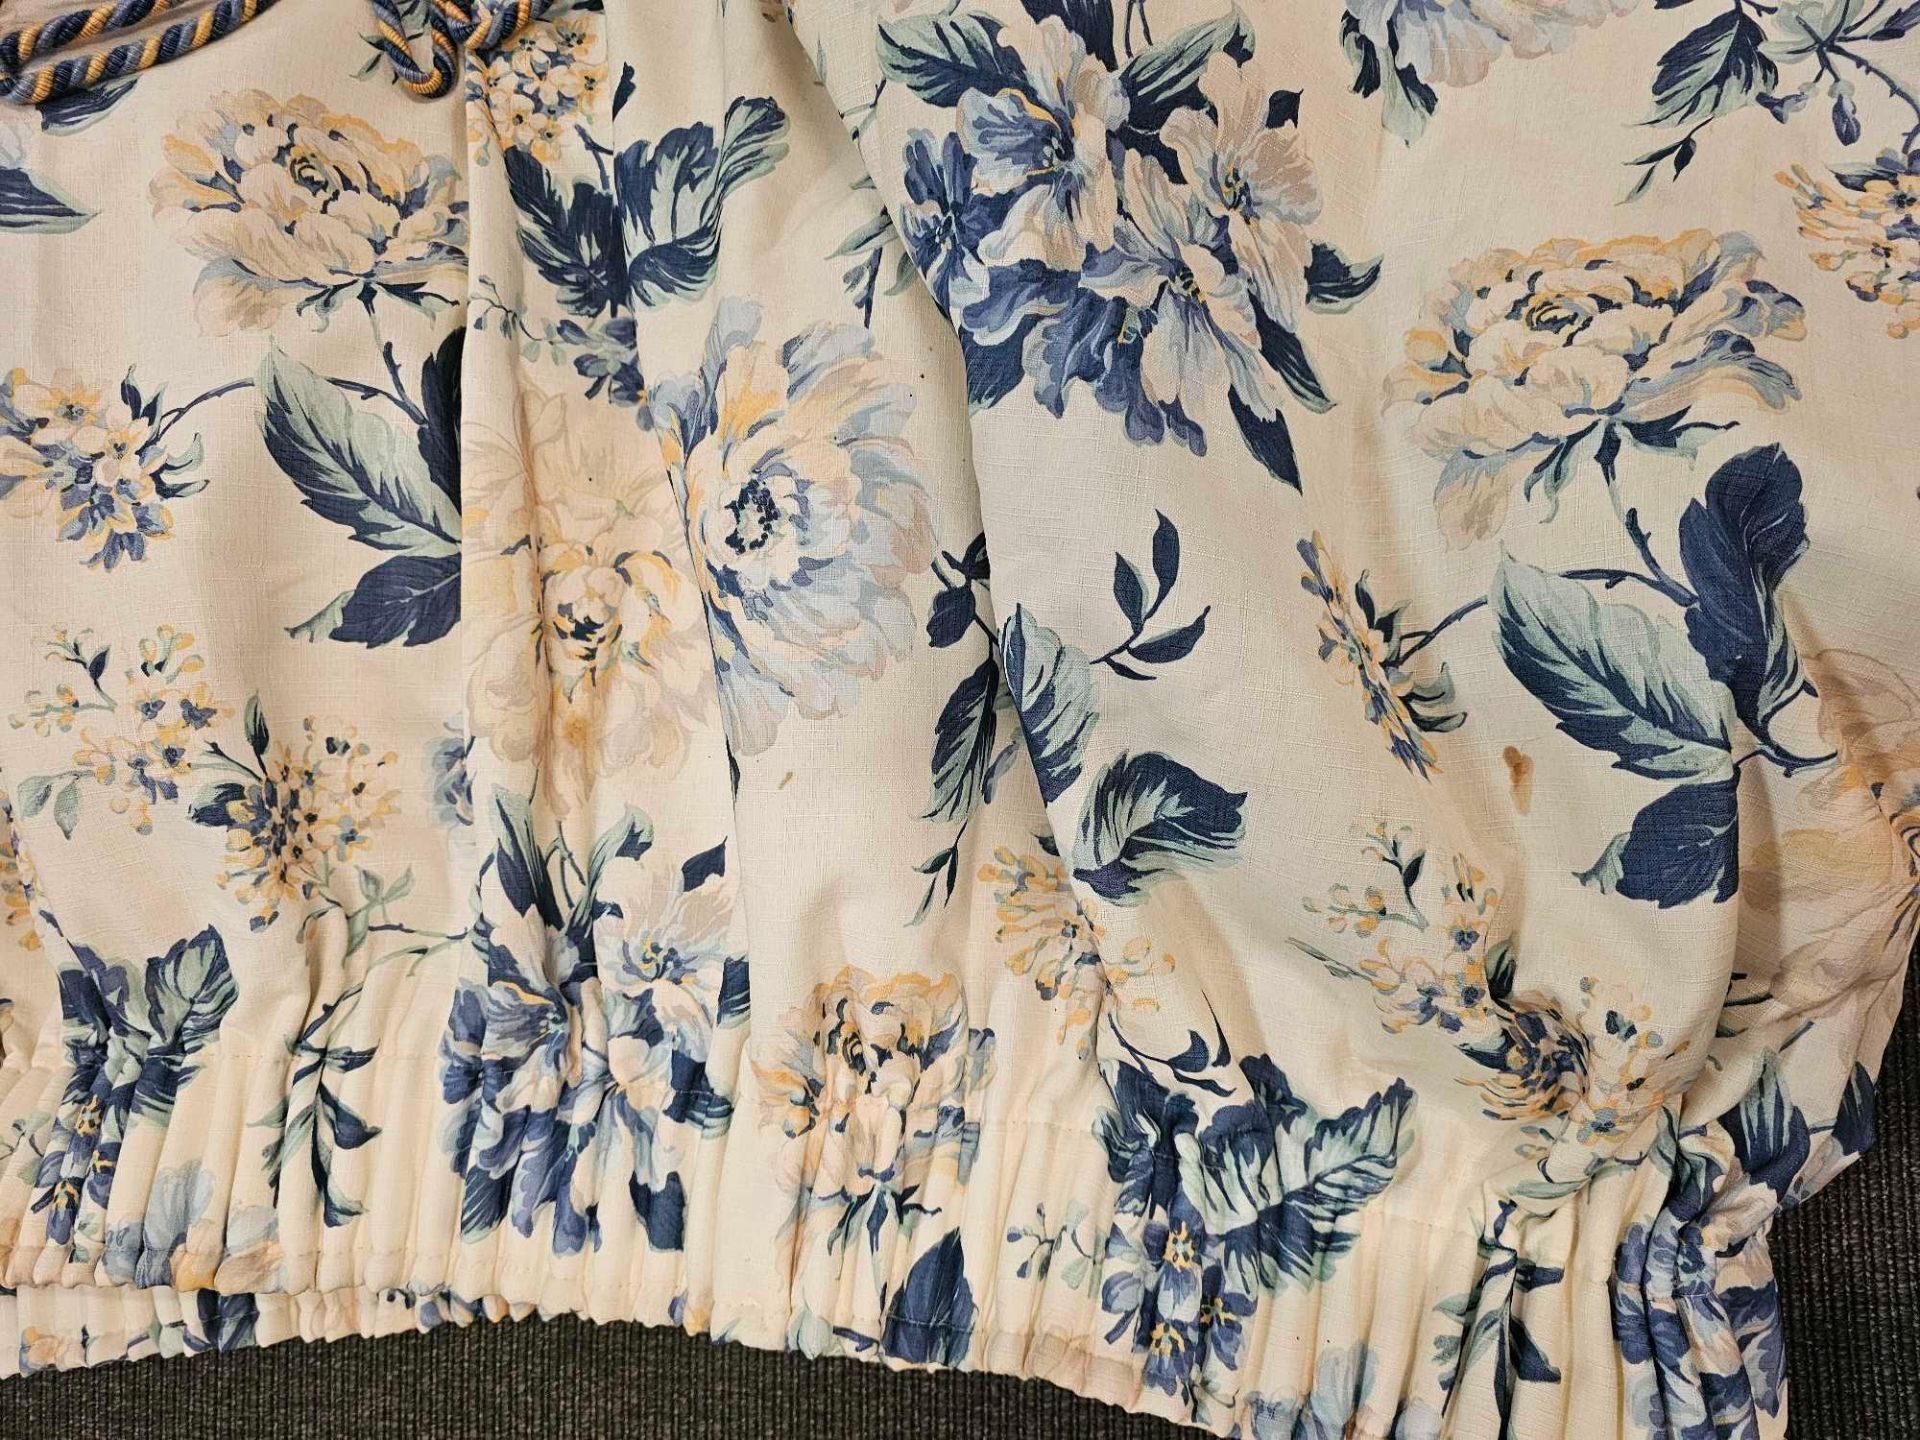 A Pair Of Fabric Curtains Flowered Pattern Tie Backs Size -cm 292 x 119 Ref Dorch 57 - Image 2 of 3